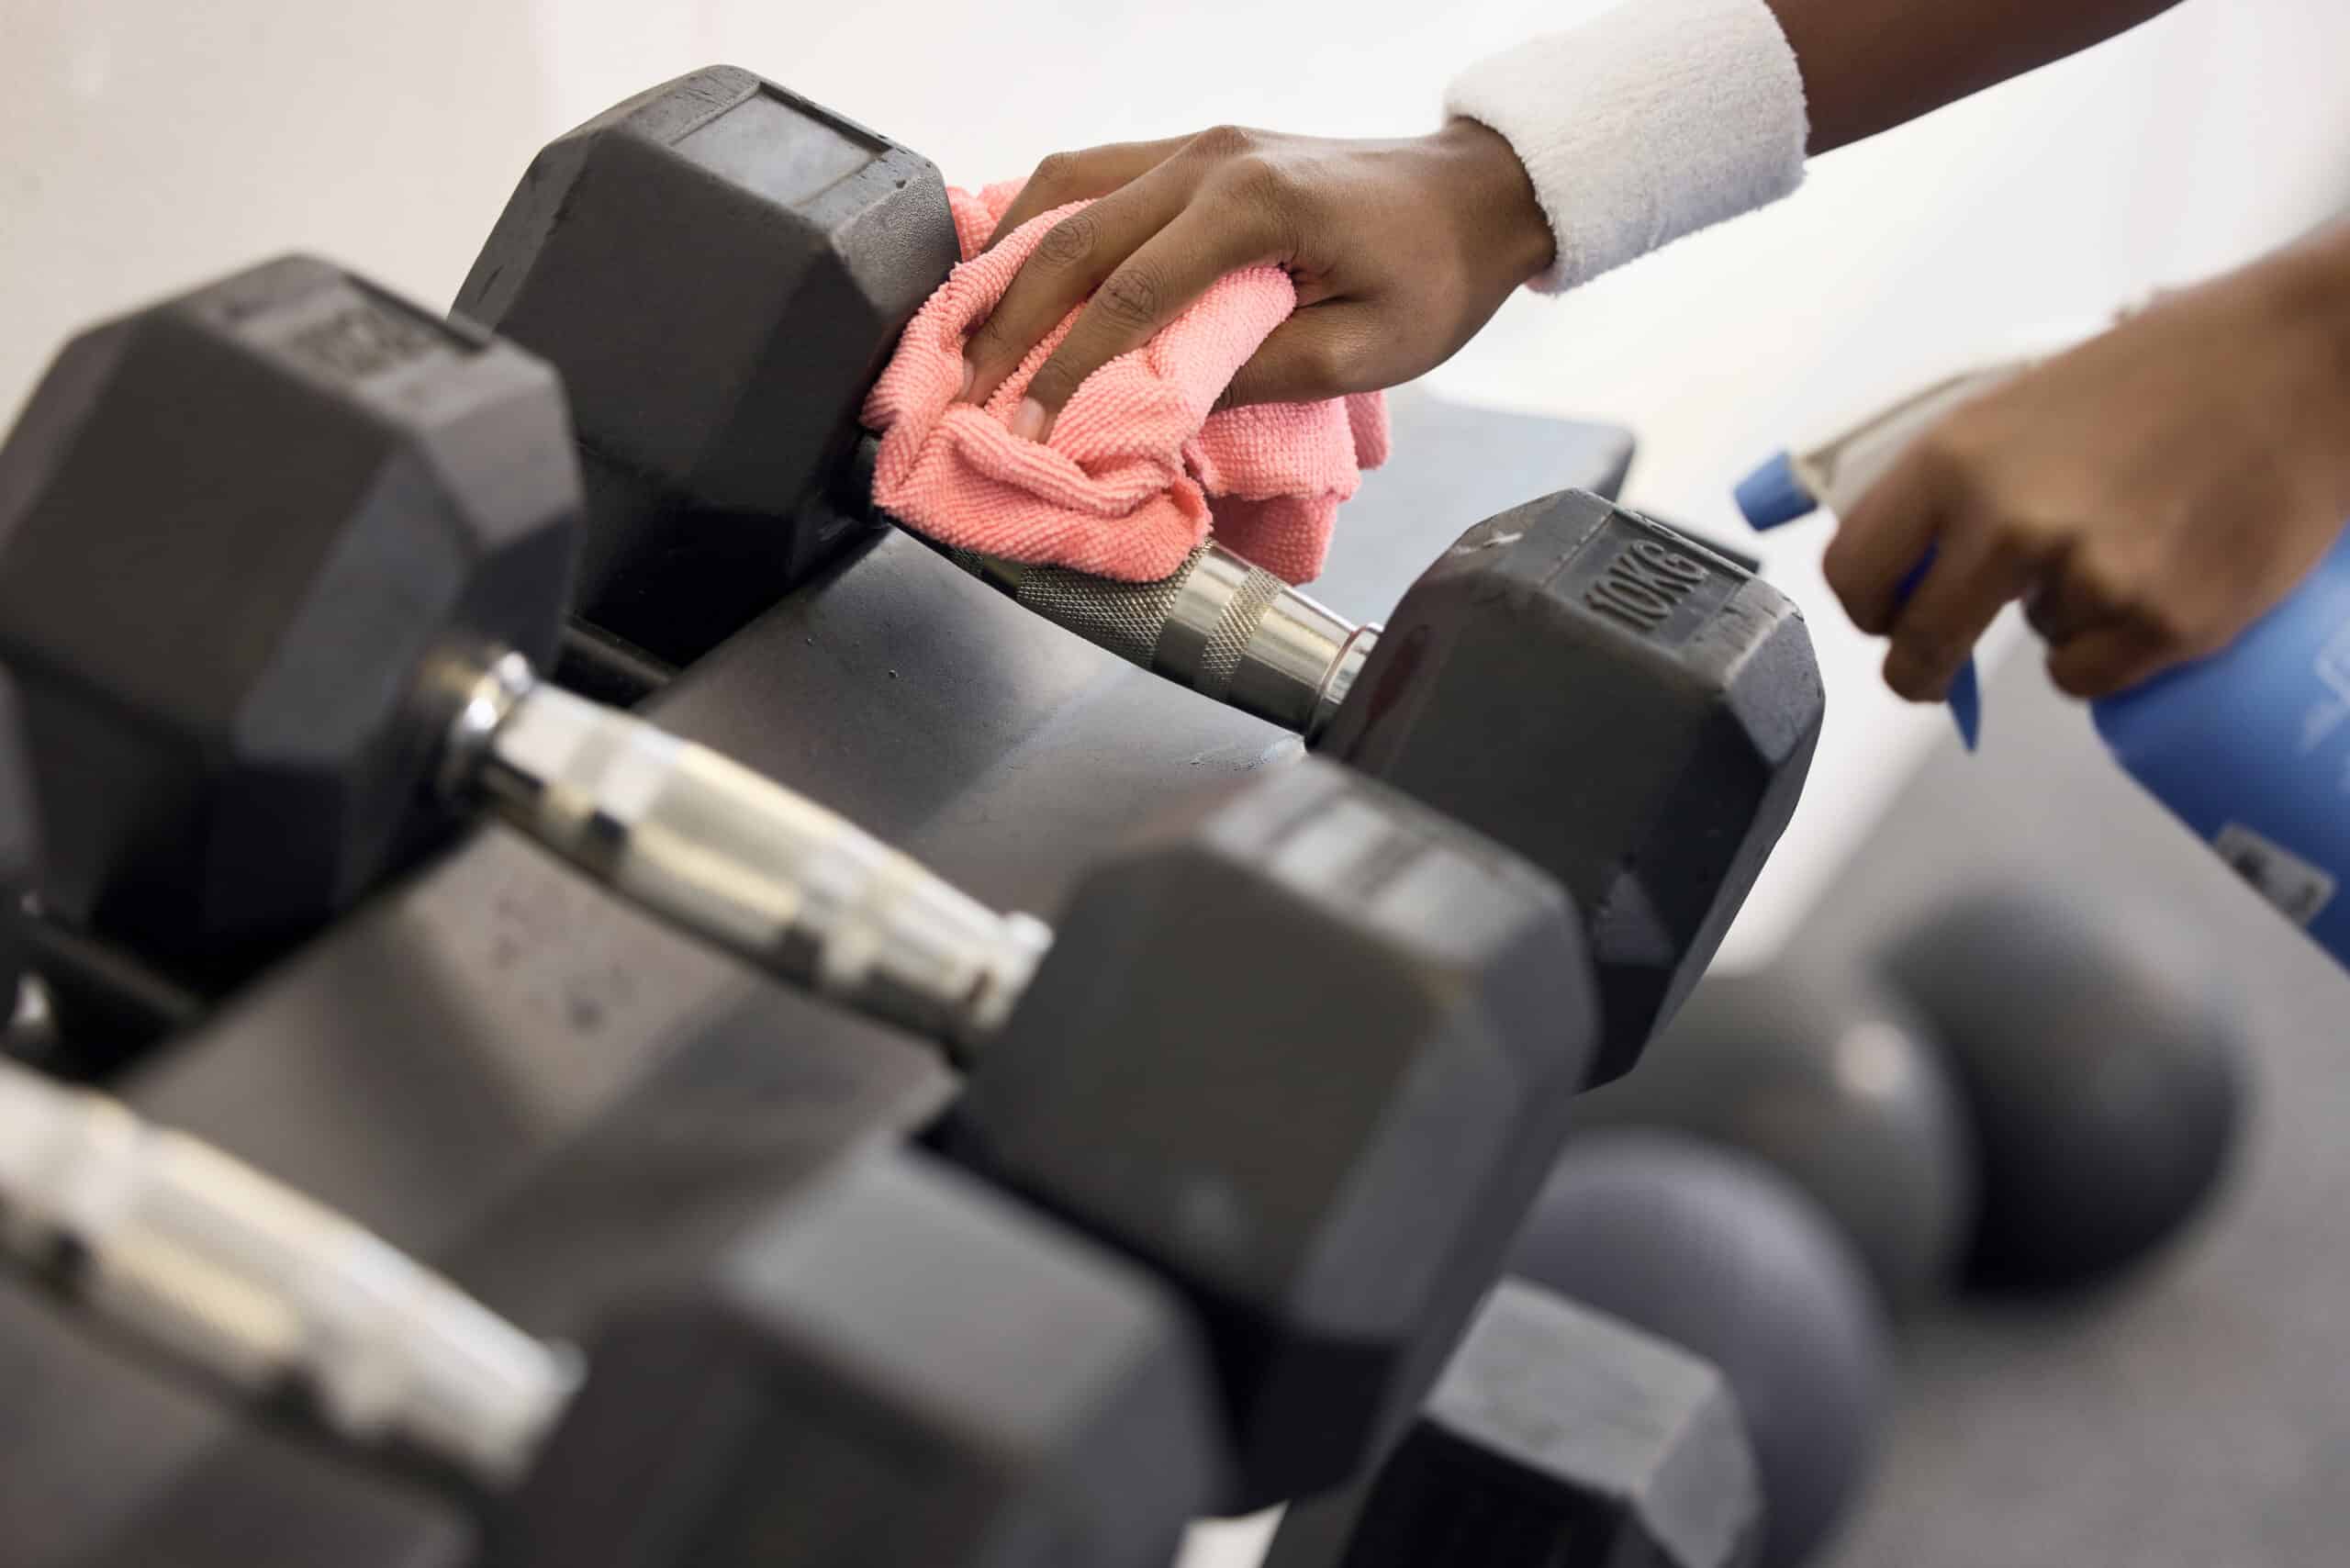 How to Clean and Care for Your Dumbbells